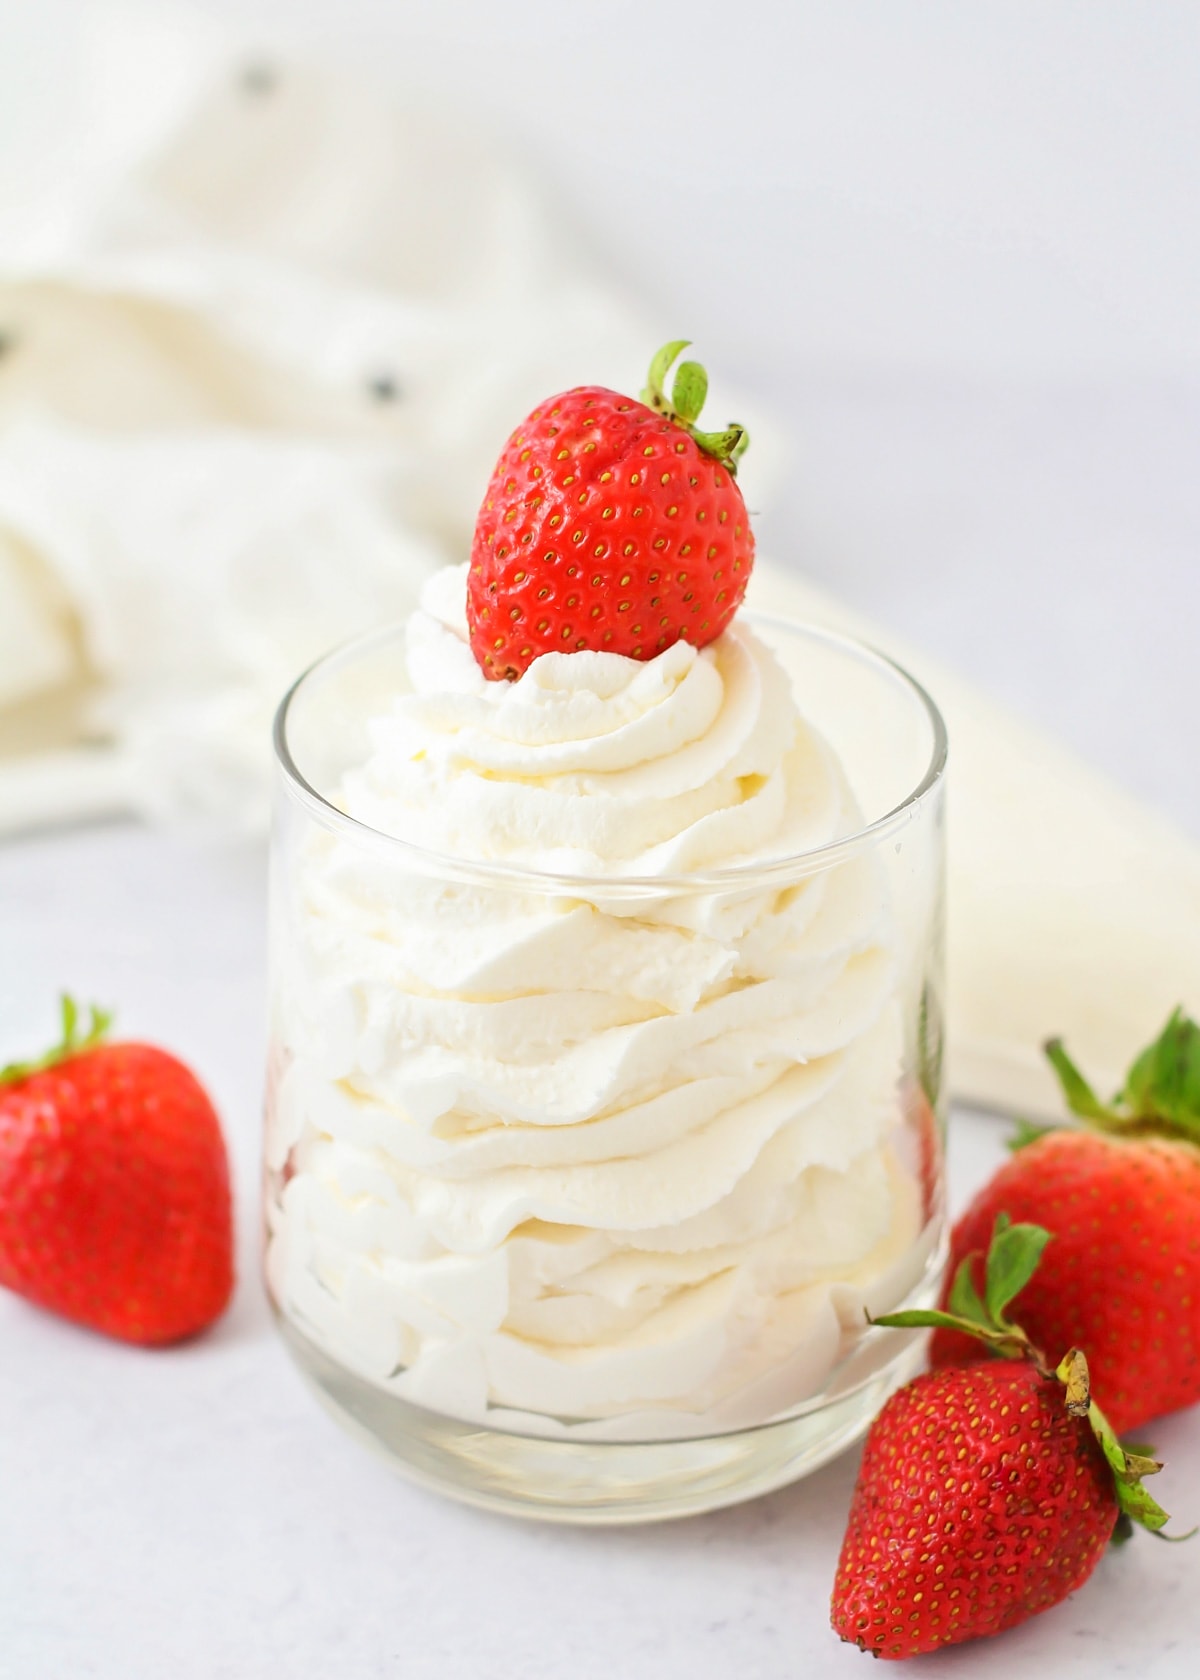 Homemade Whipped Cream Recipe served in a red and white bowl.